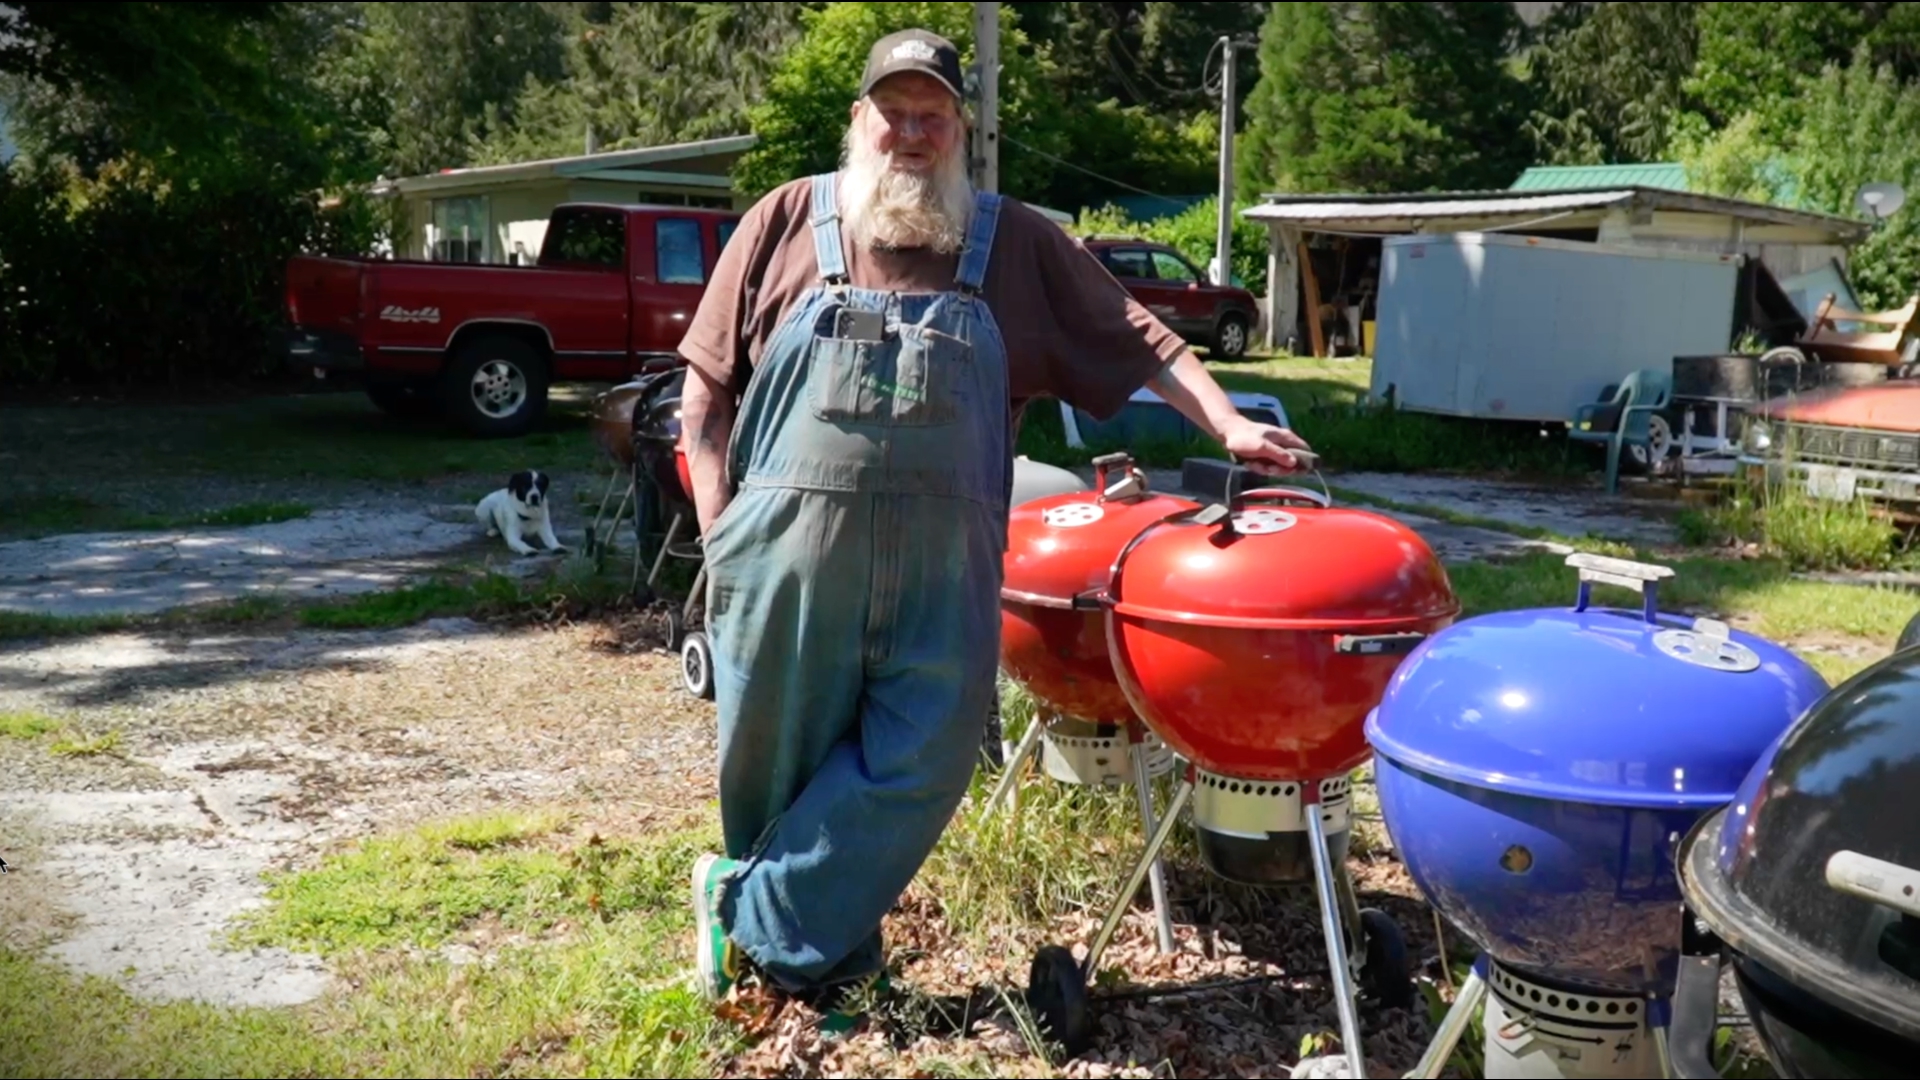 Jimmer DeGroot’s drive-by collection of Weber grills is a sight to behold. #k5evening